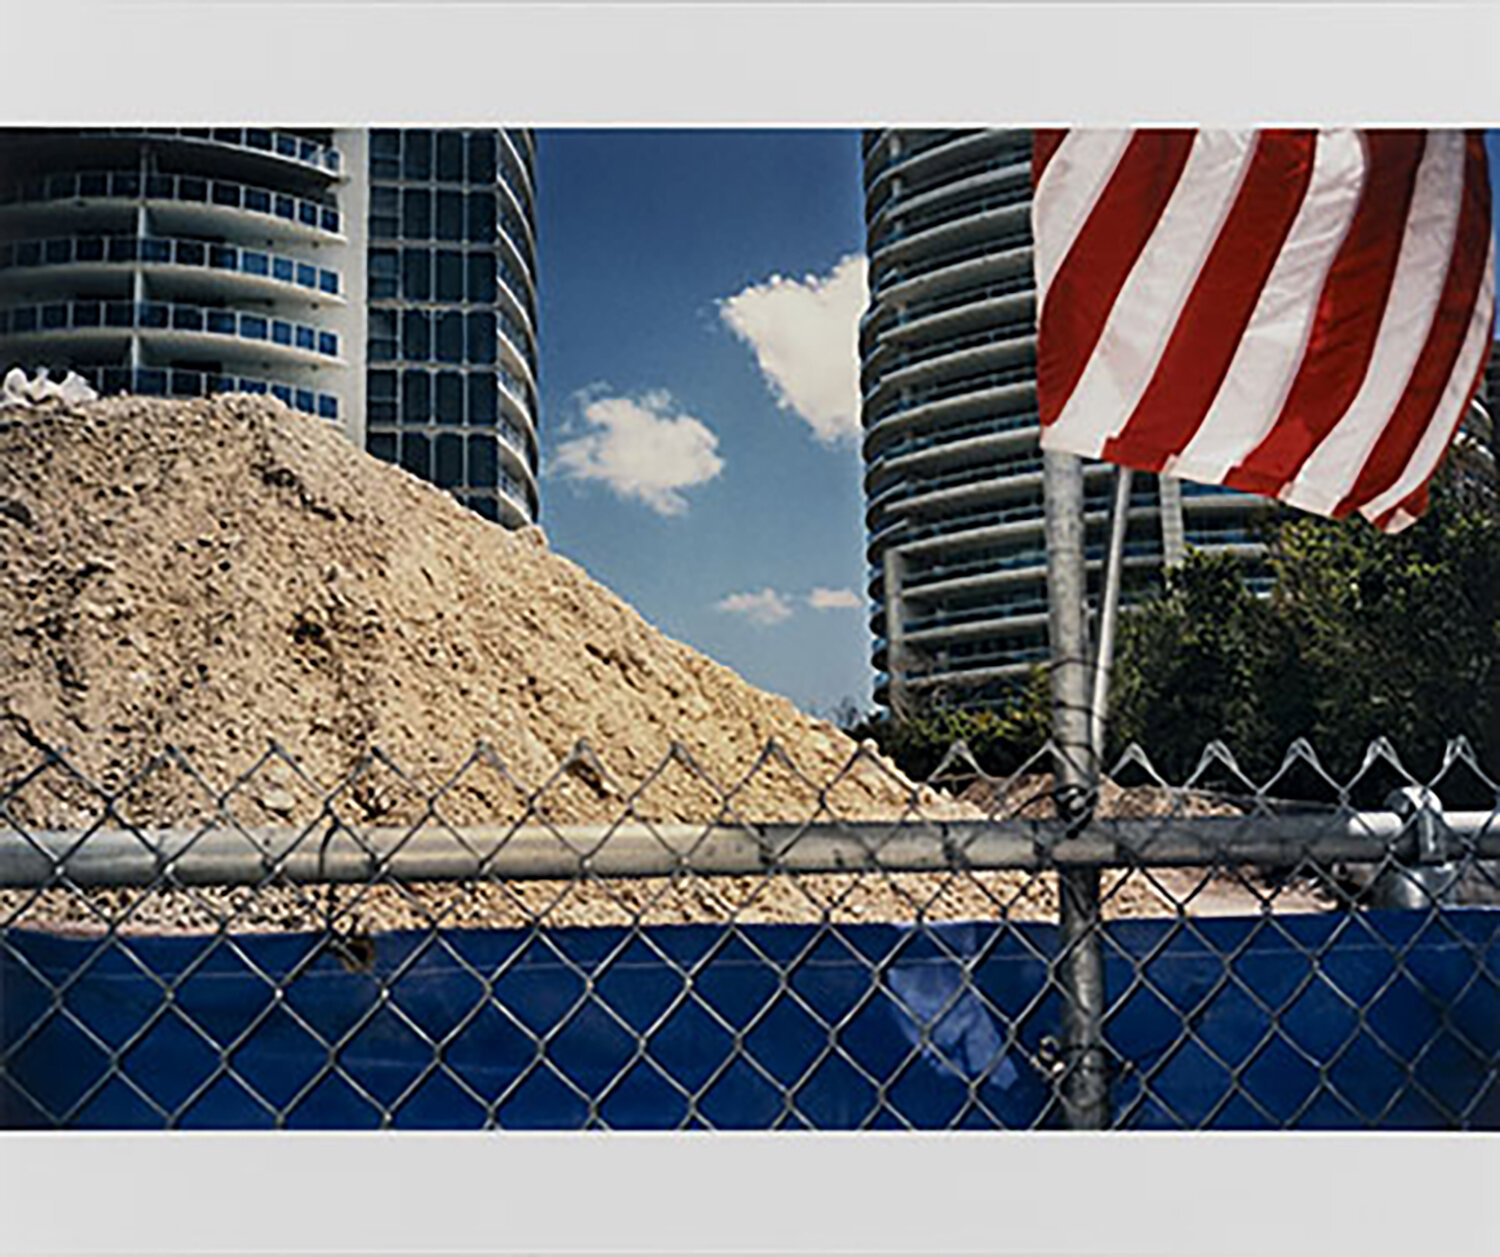   Buildings with Flag, Miami , 2004 Edition: 4/25 16 x 24 in. — Image Size The Do Good Fund, Inc., 2018-022 